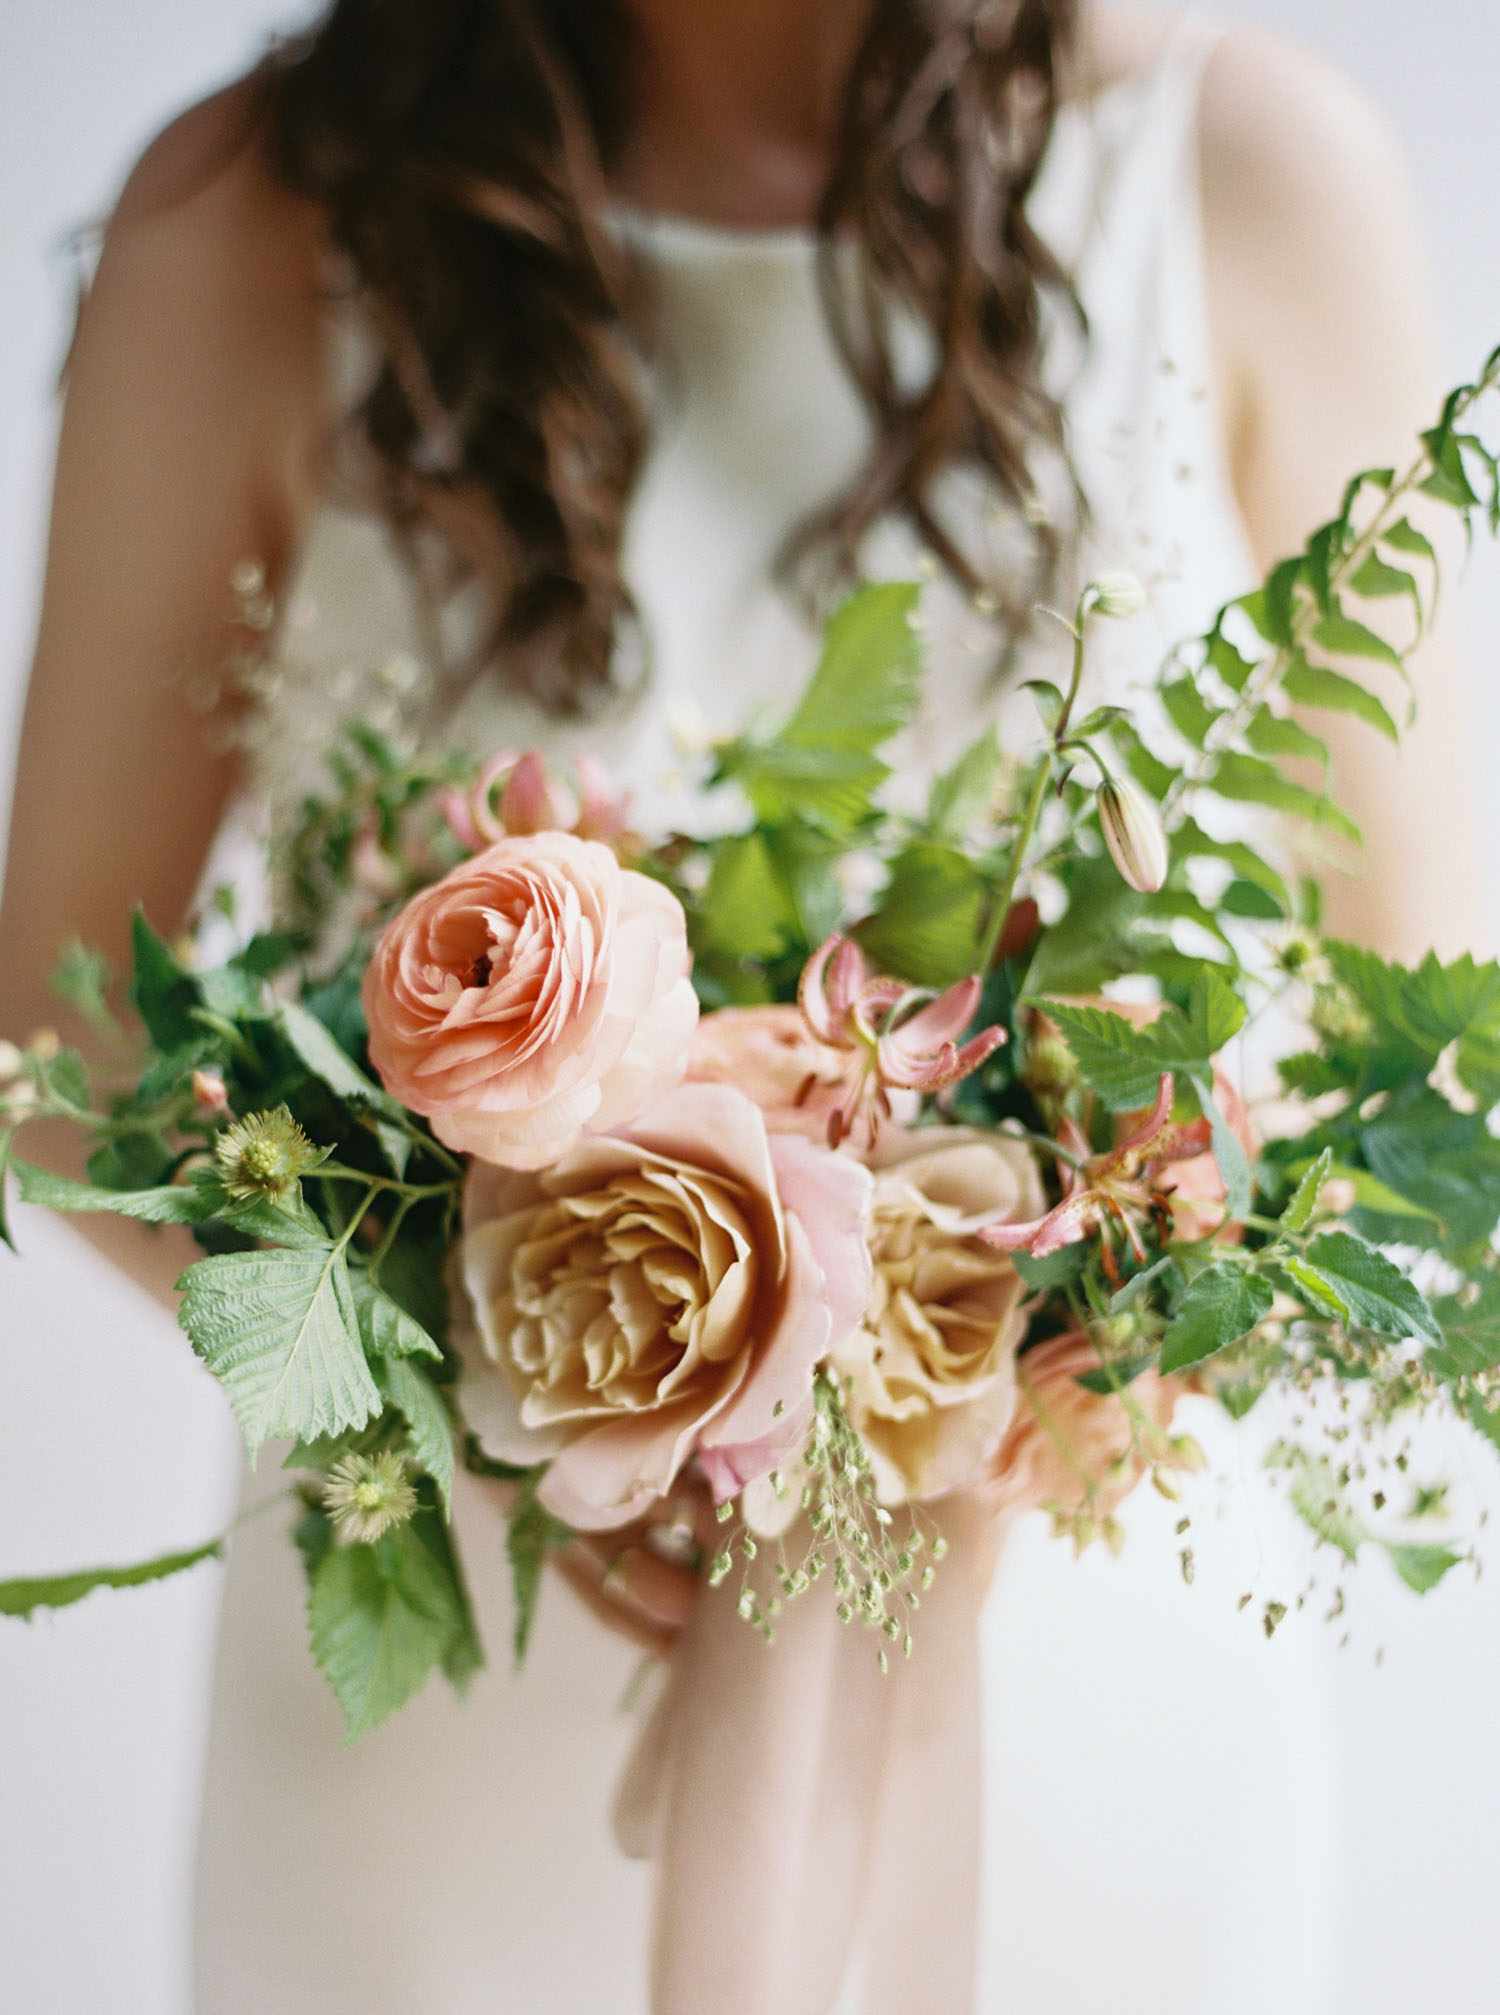 Lifestyle floral photography captured at Wildshoot Farm by Seattle Wedding Photographer Anna Peters